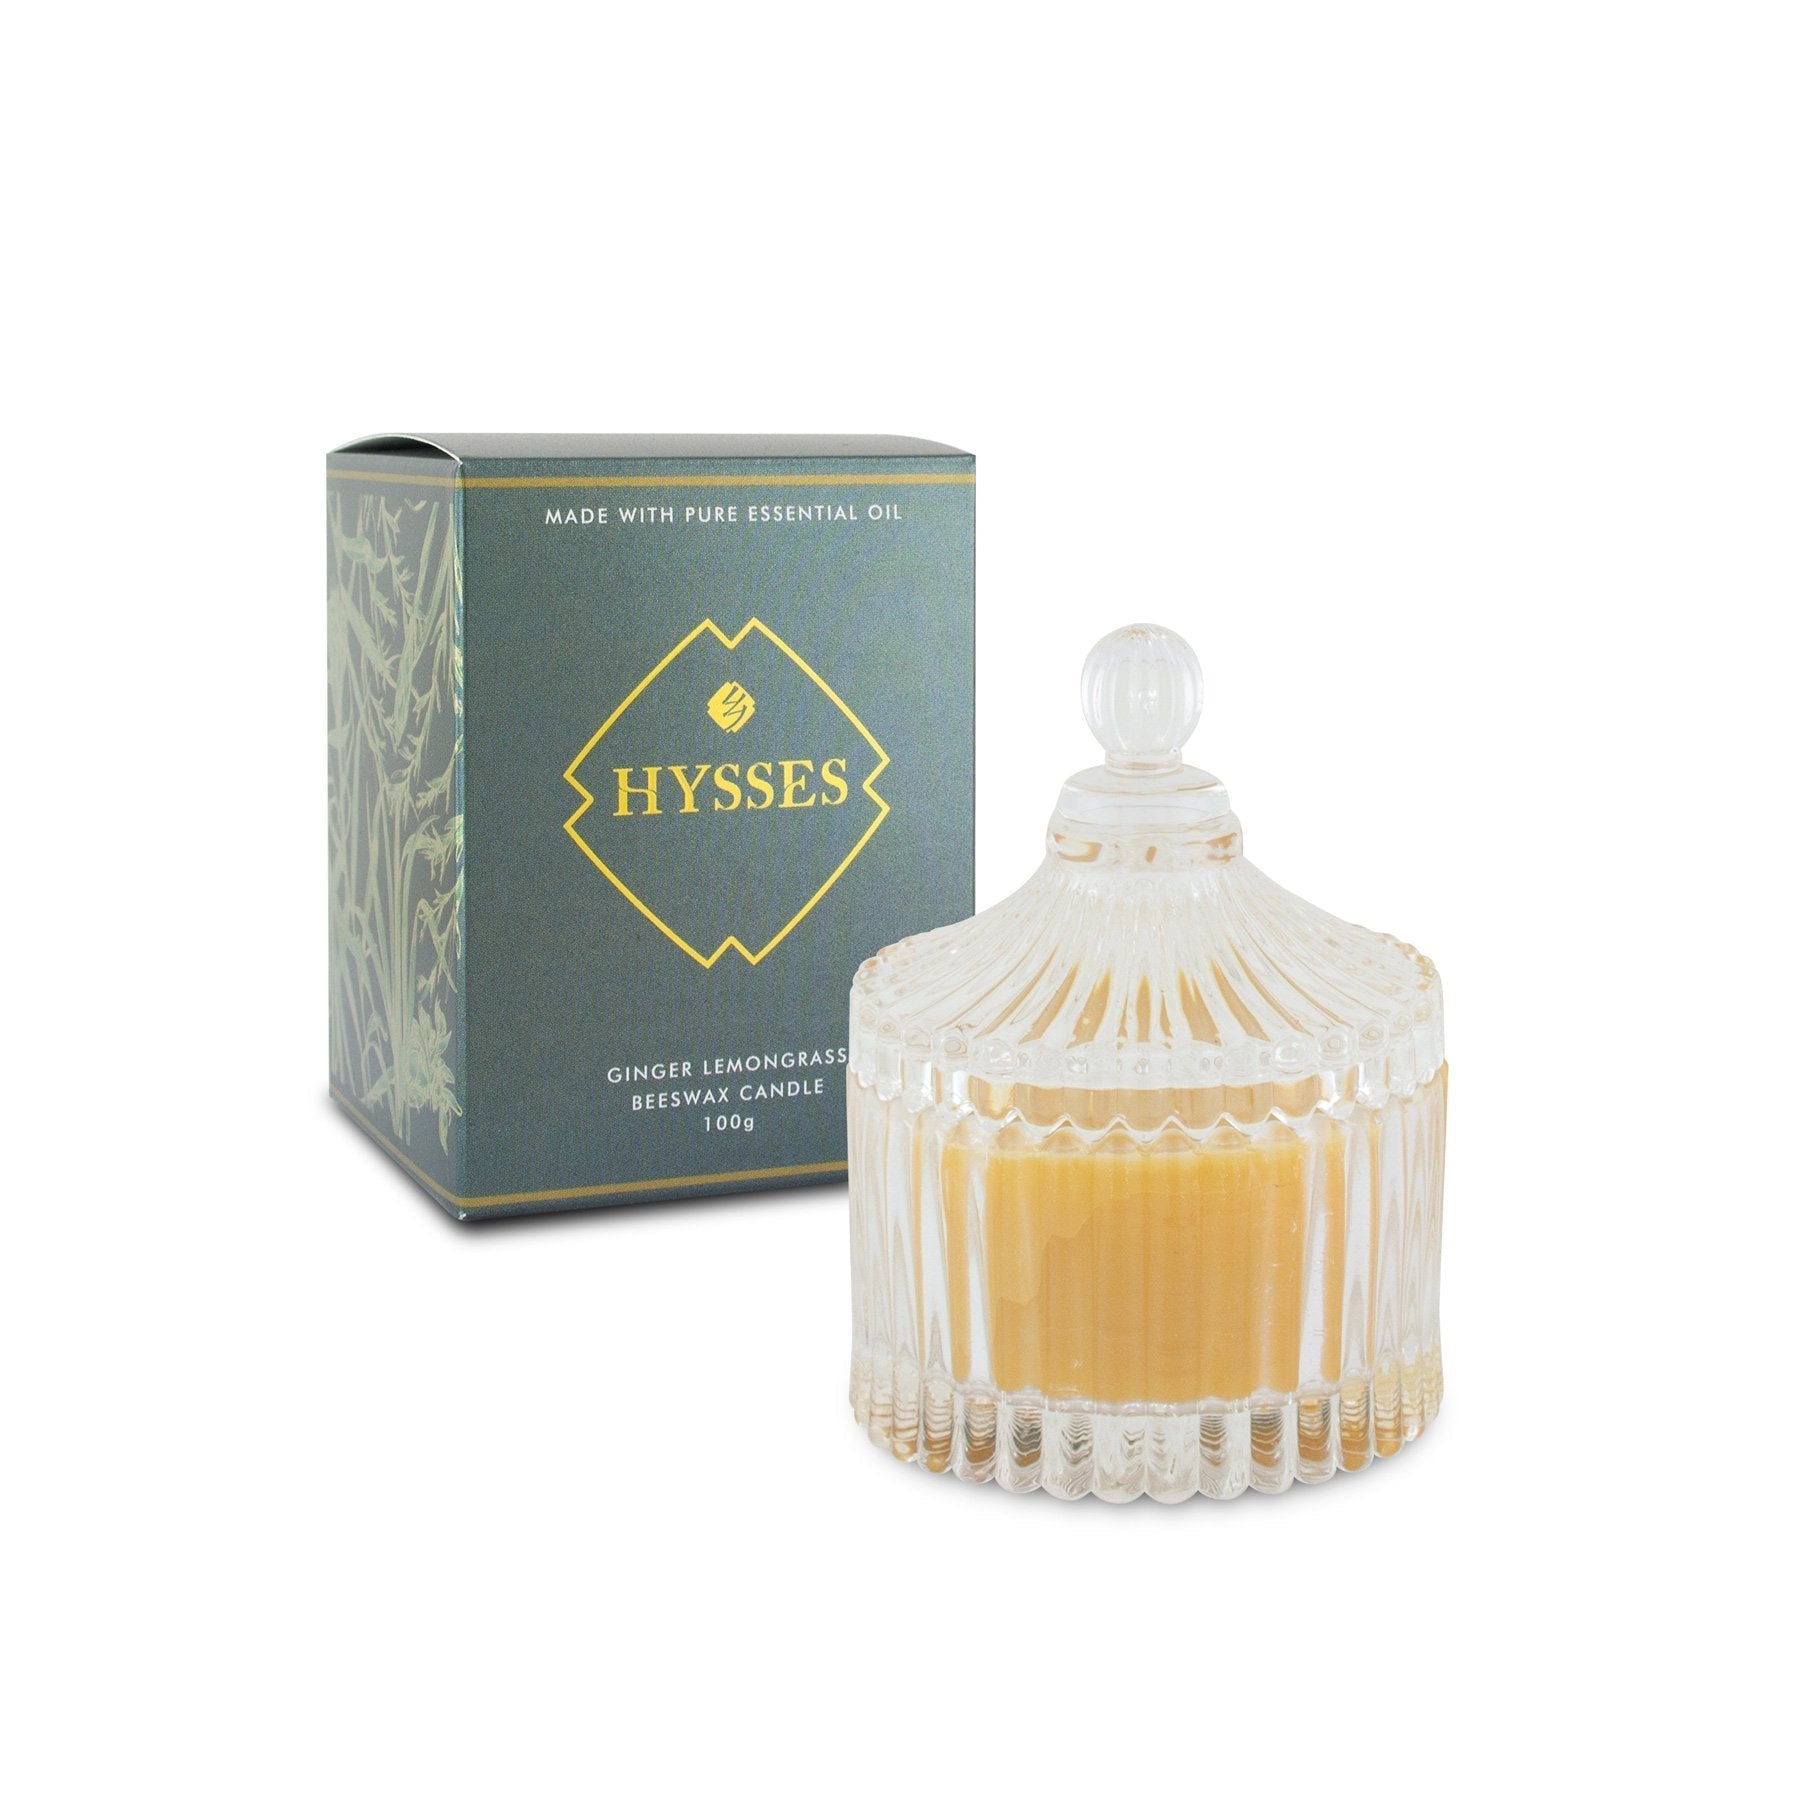 Hysses Home Scents 200g Beeswax Candle Ginger Lemongrass, 200g